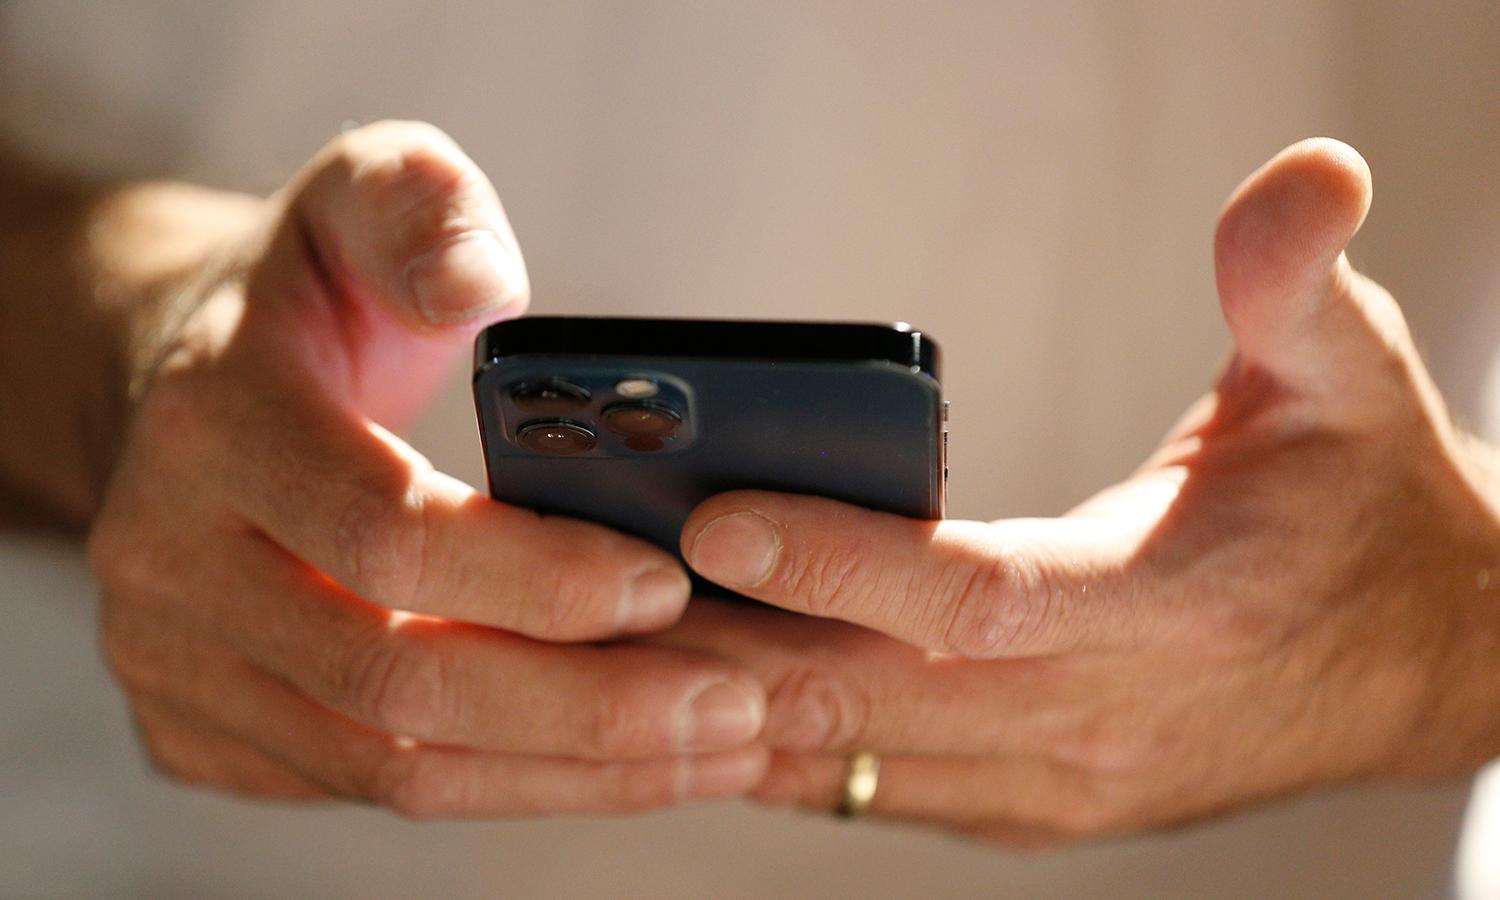 A man uses a smartphone to scan and download an app